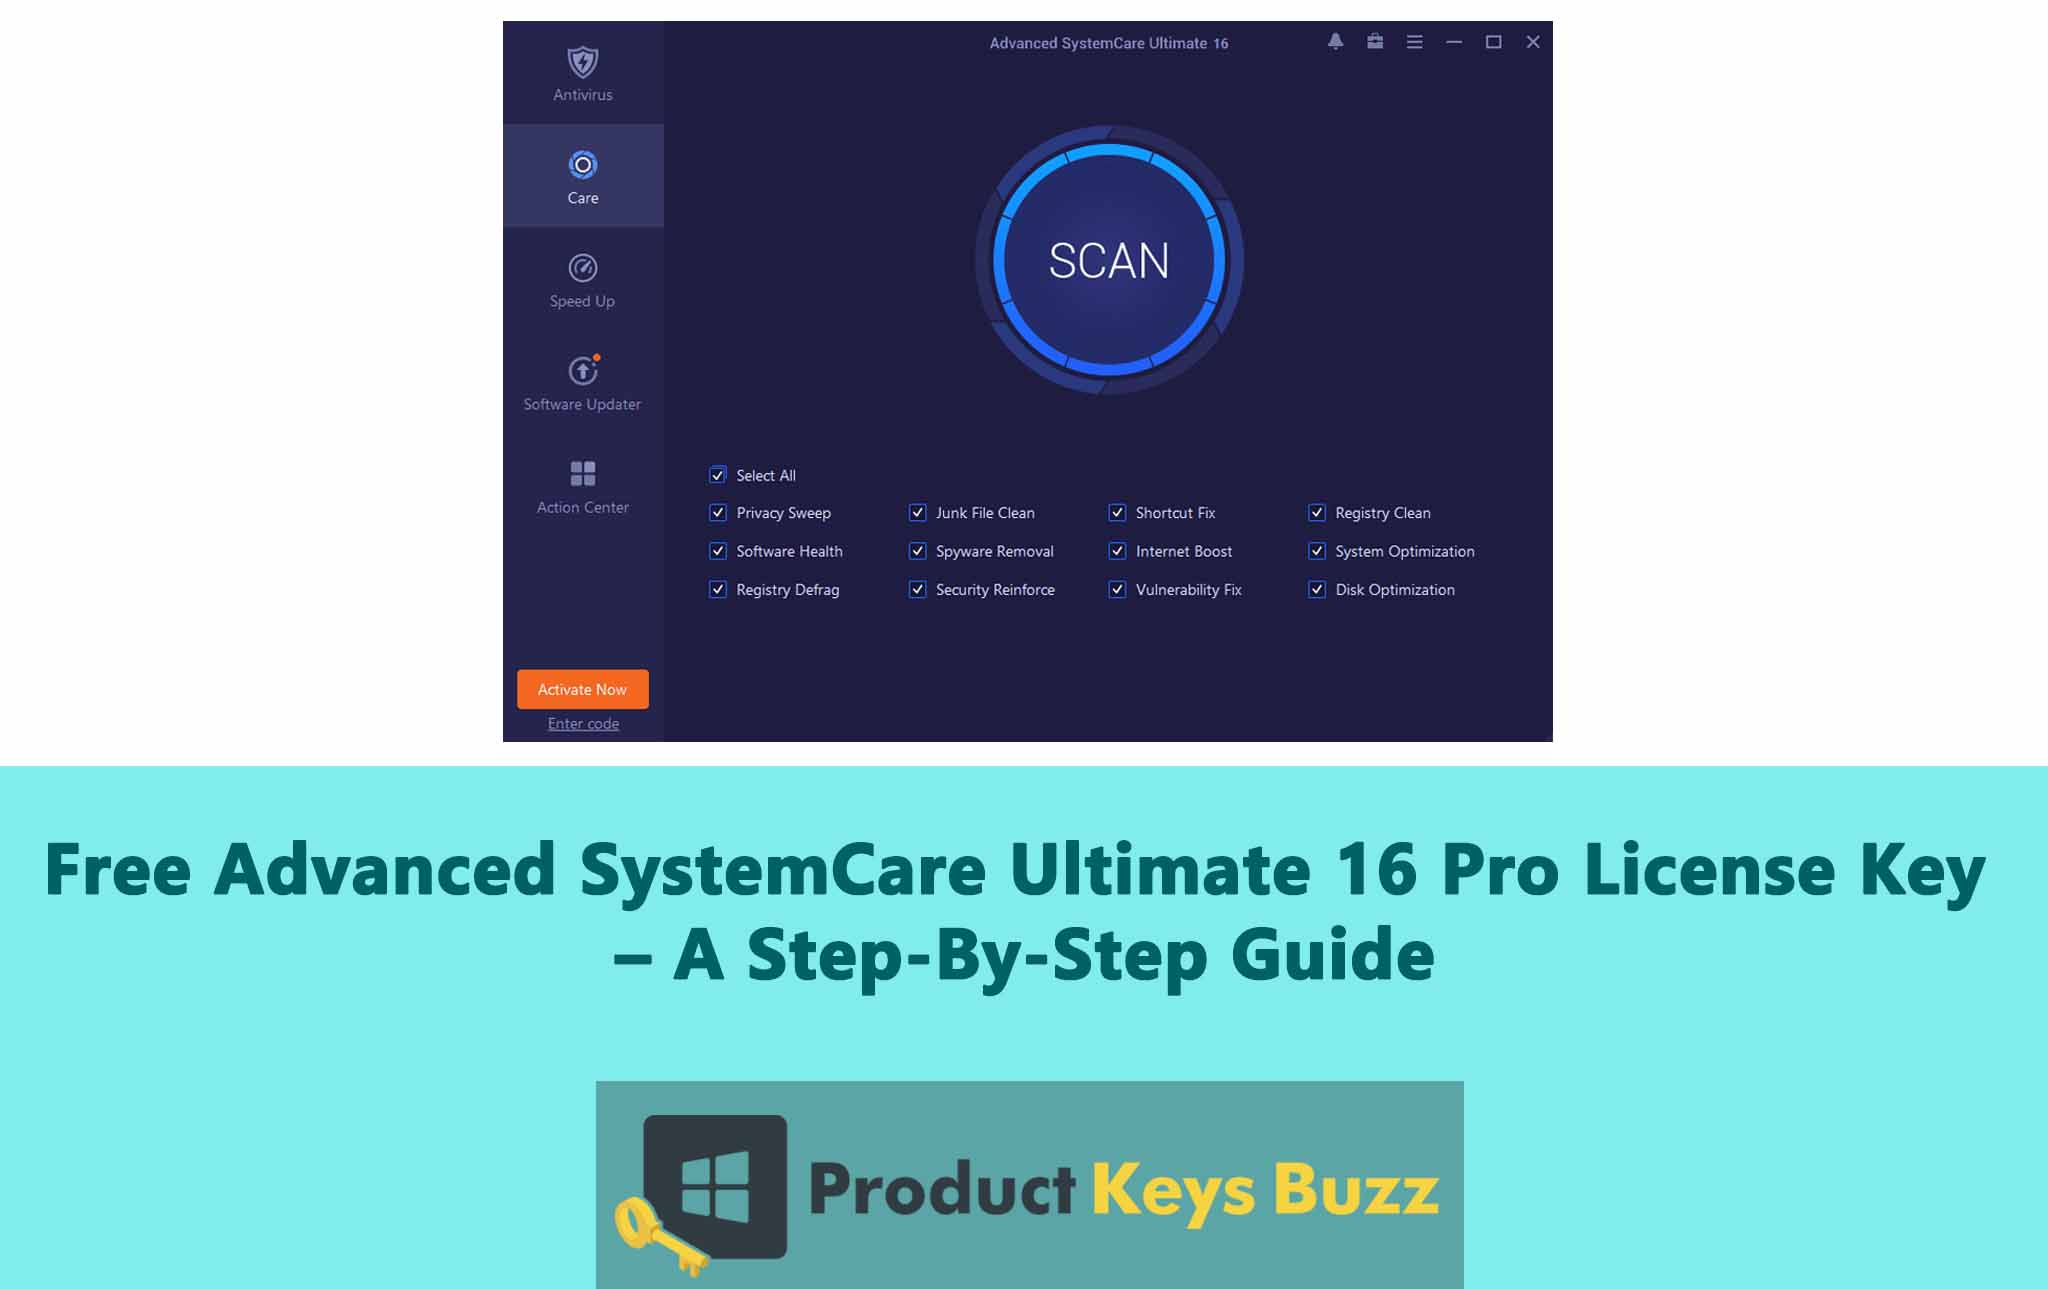 Free Advanced SystemCare Ultimate 16 Pro License Key